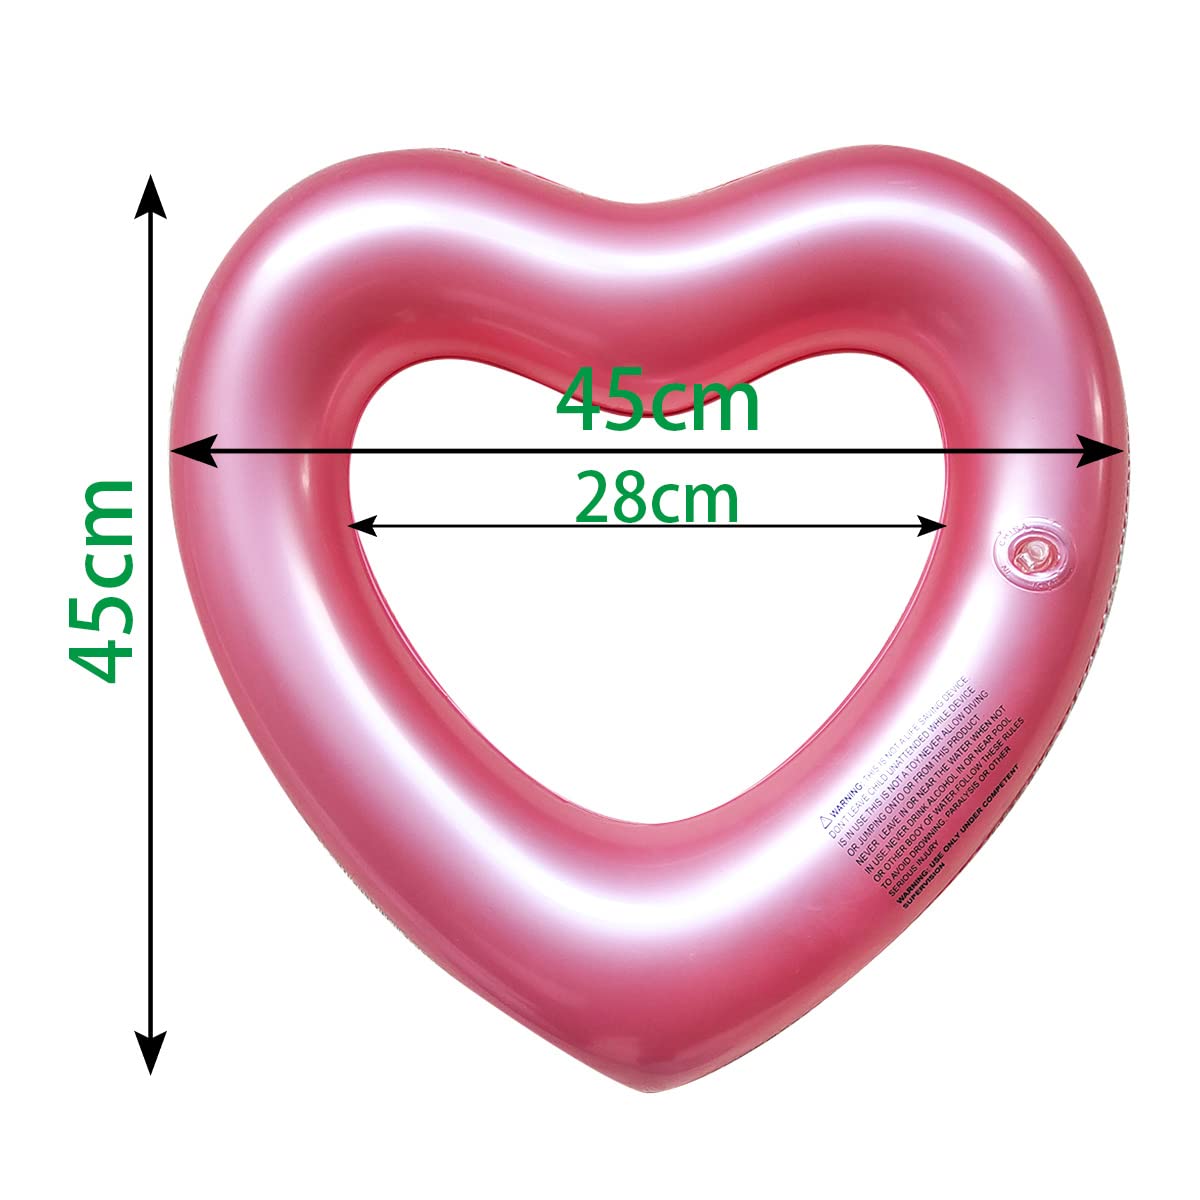 SUNSHINE-MALL Inflatable Swim Rings, Heart Shaped Swimming Pool Float Loungers Tube, Water Fun Beach Party Toys for Kids, Adults Small Rose gold